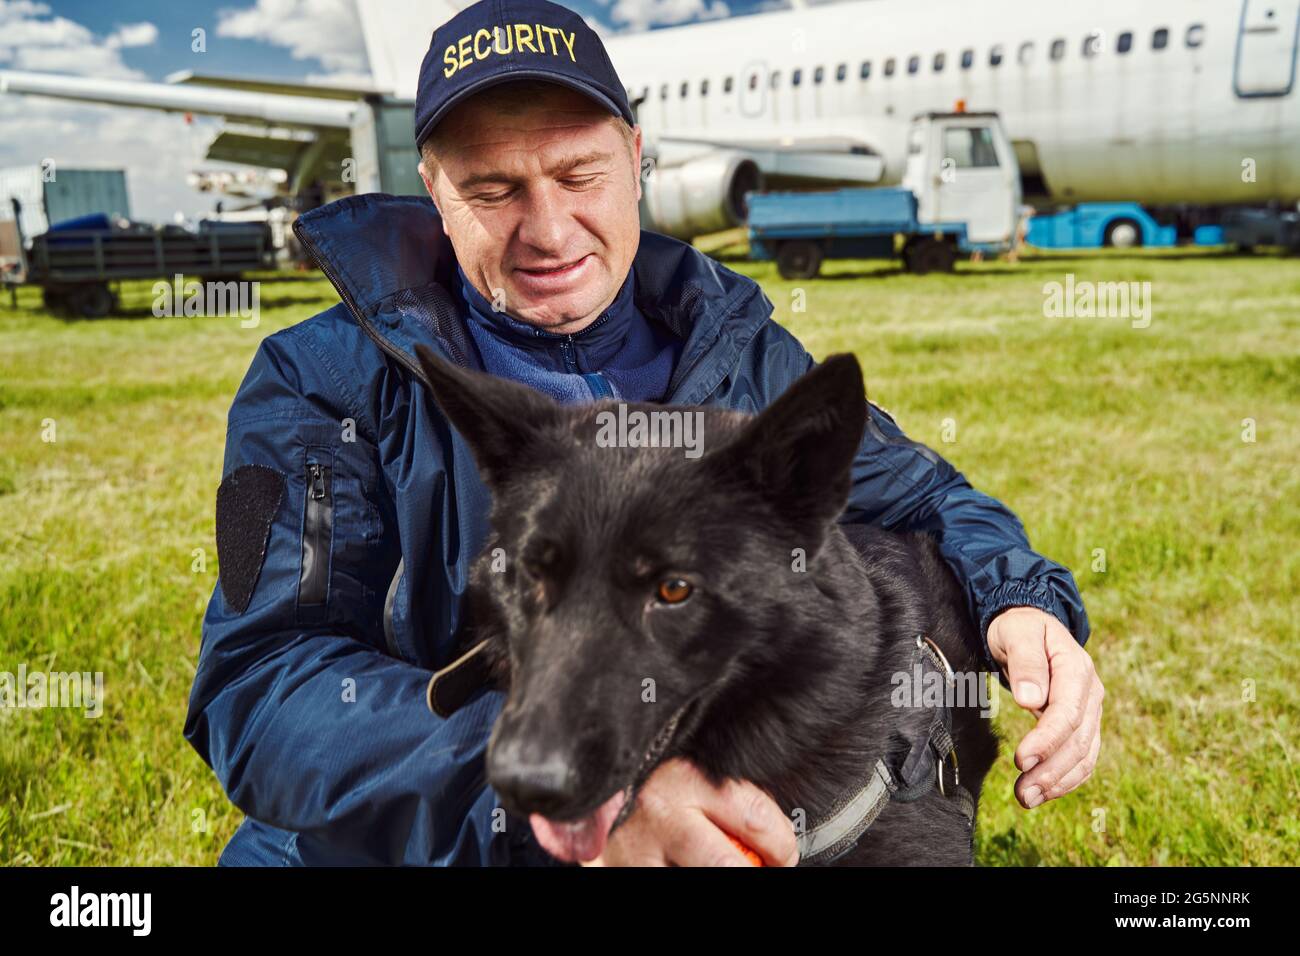 Detection dog on duty with security officer at airfield Stock Photo